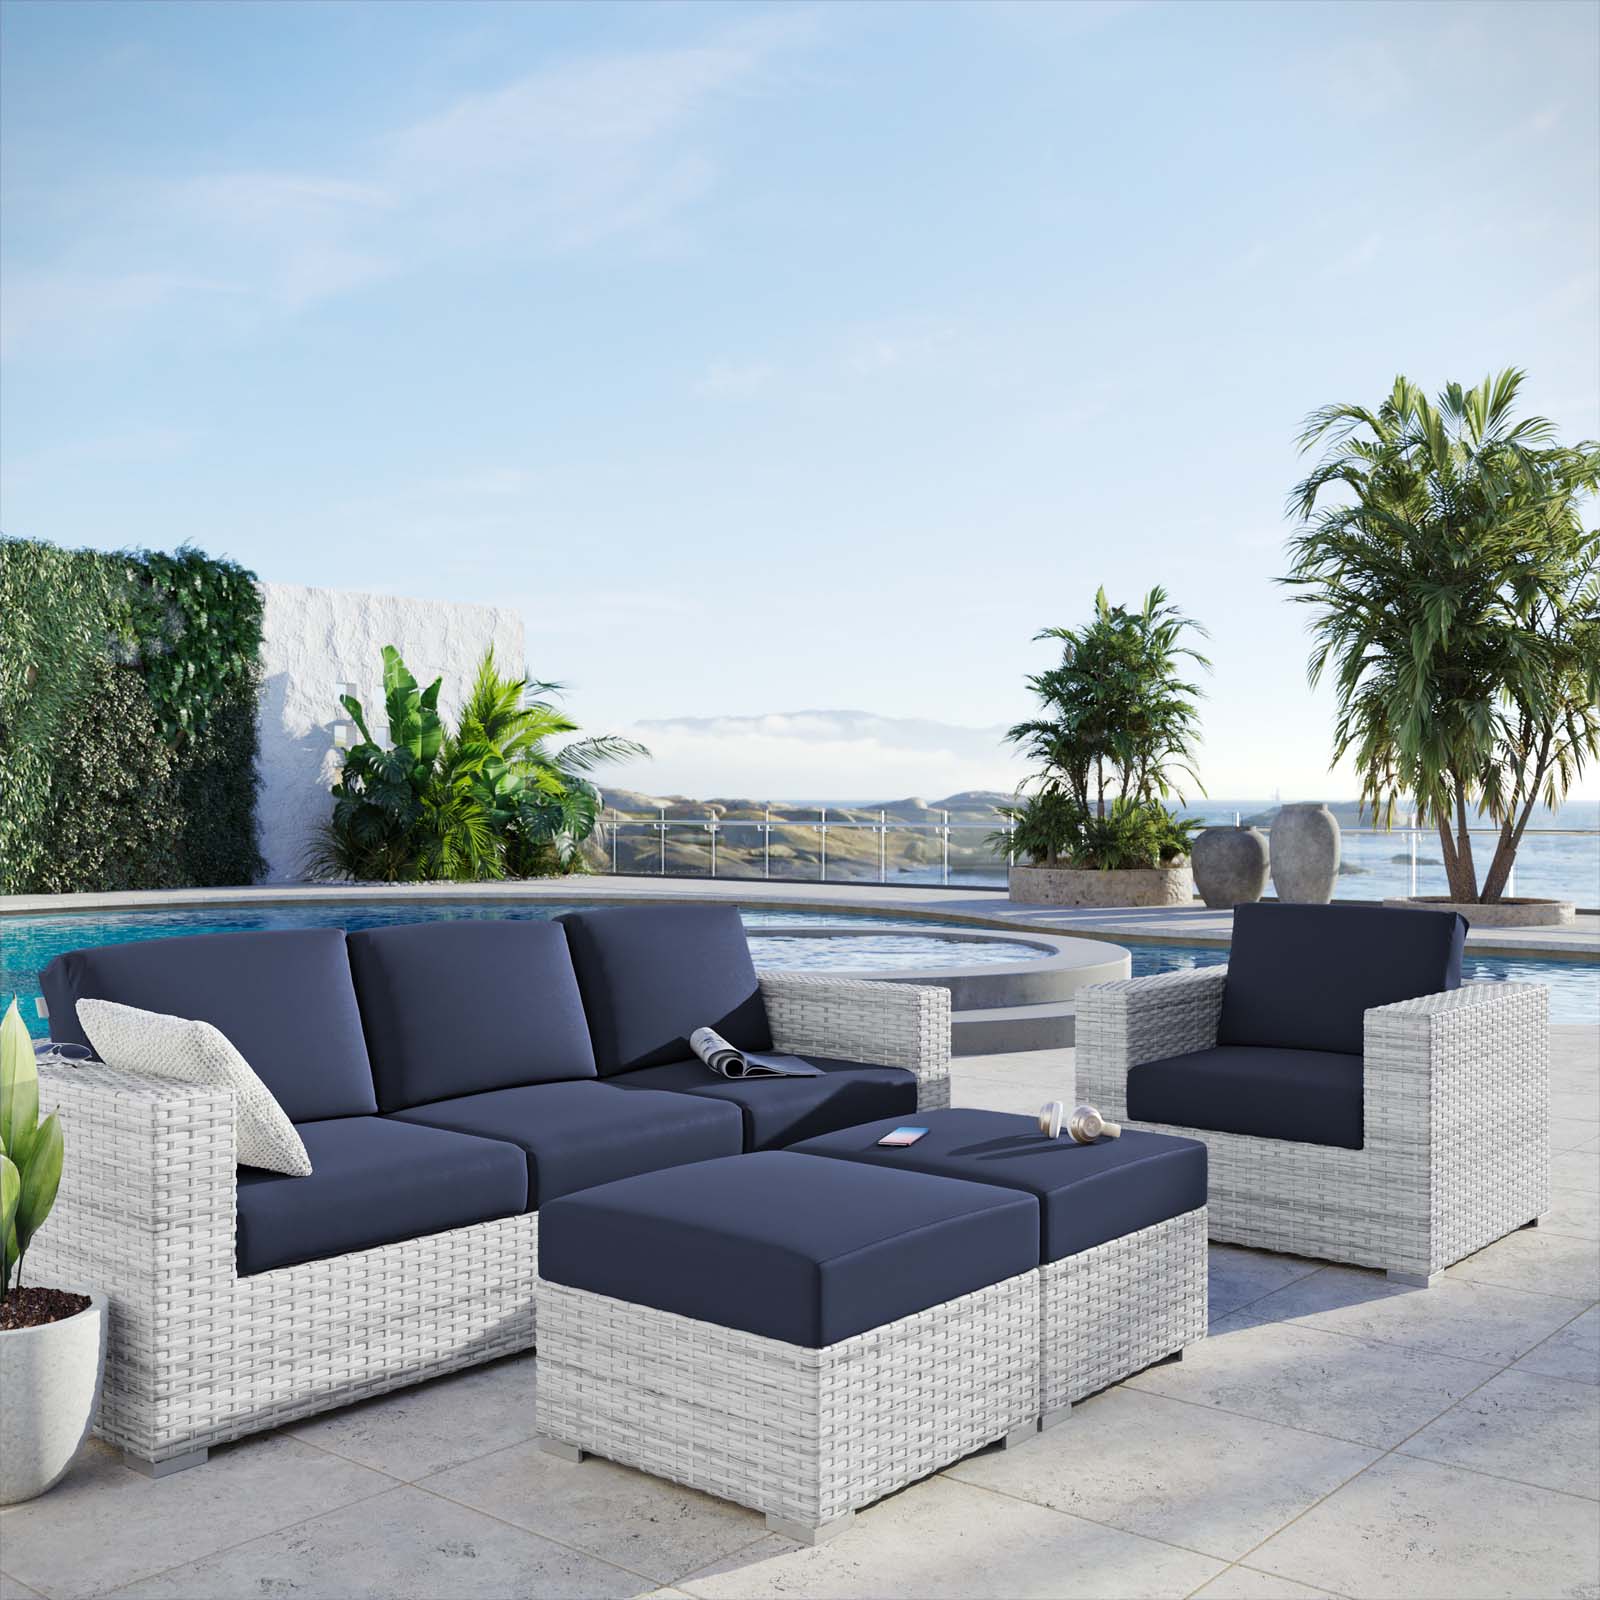 Lounge Sectional Sofa Chair Set, Rattan, Wicker, Light Grey Gray Blue Navy, Modern Contemporary Urban Design, Outdoor Patio Balcony Cafe Bistro Garden Furniture Hotel Hospitality - image 2 of 10